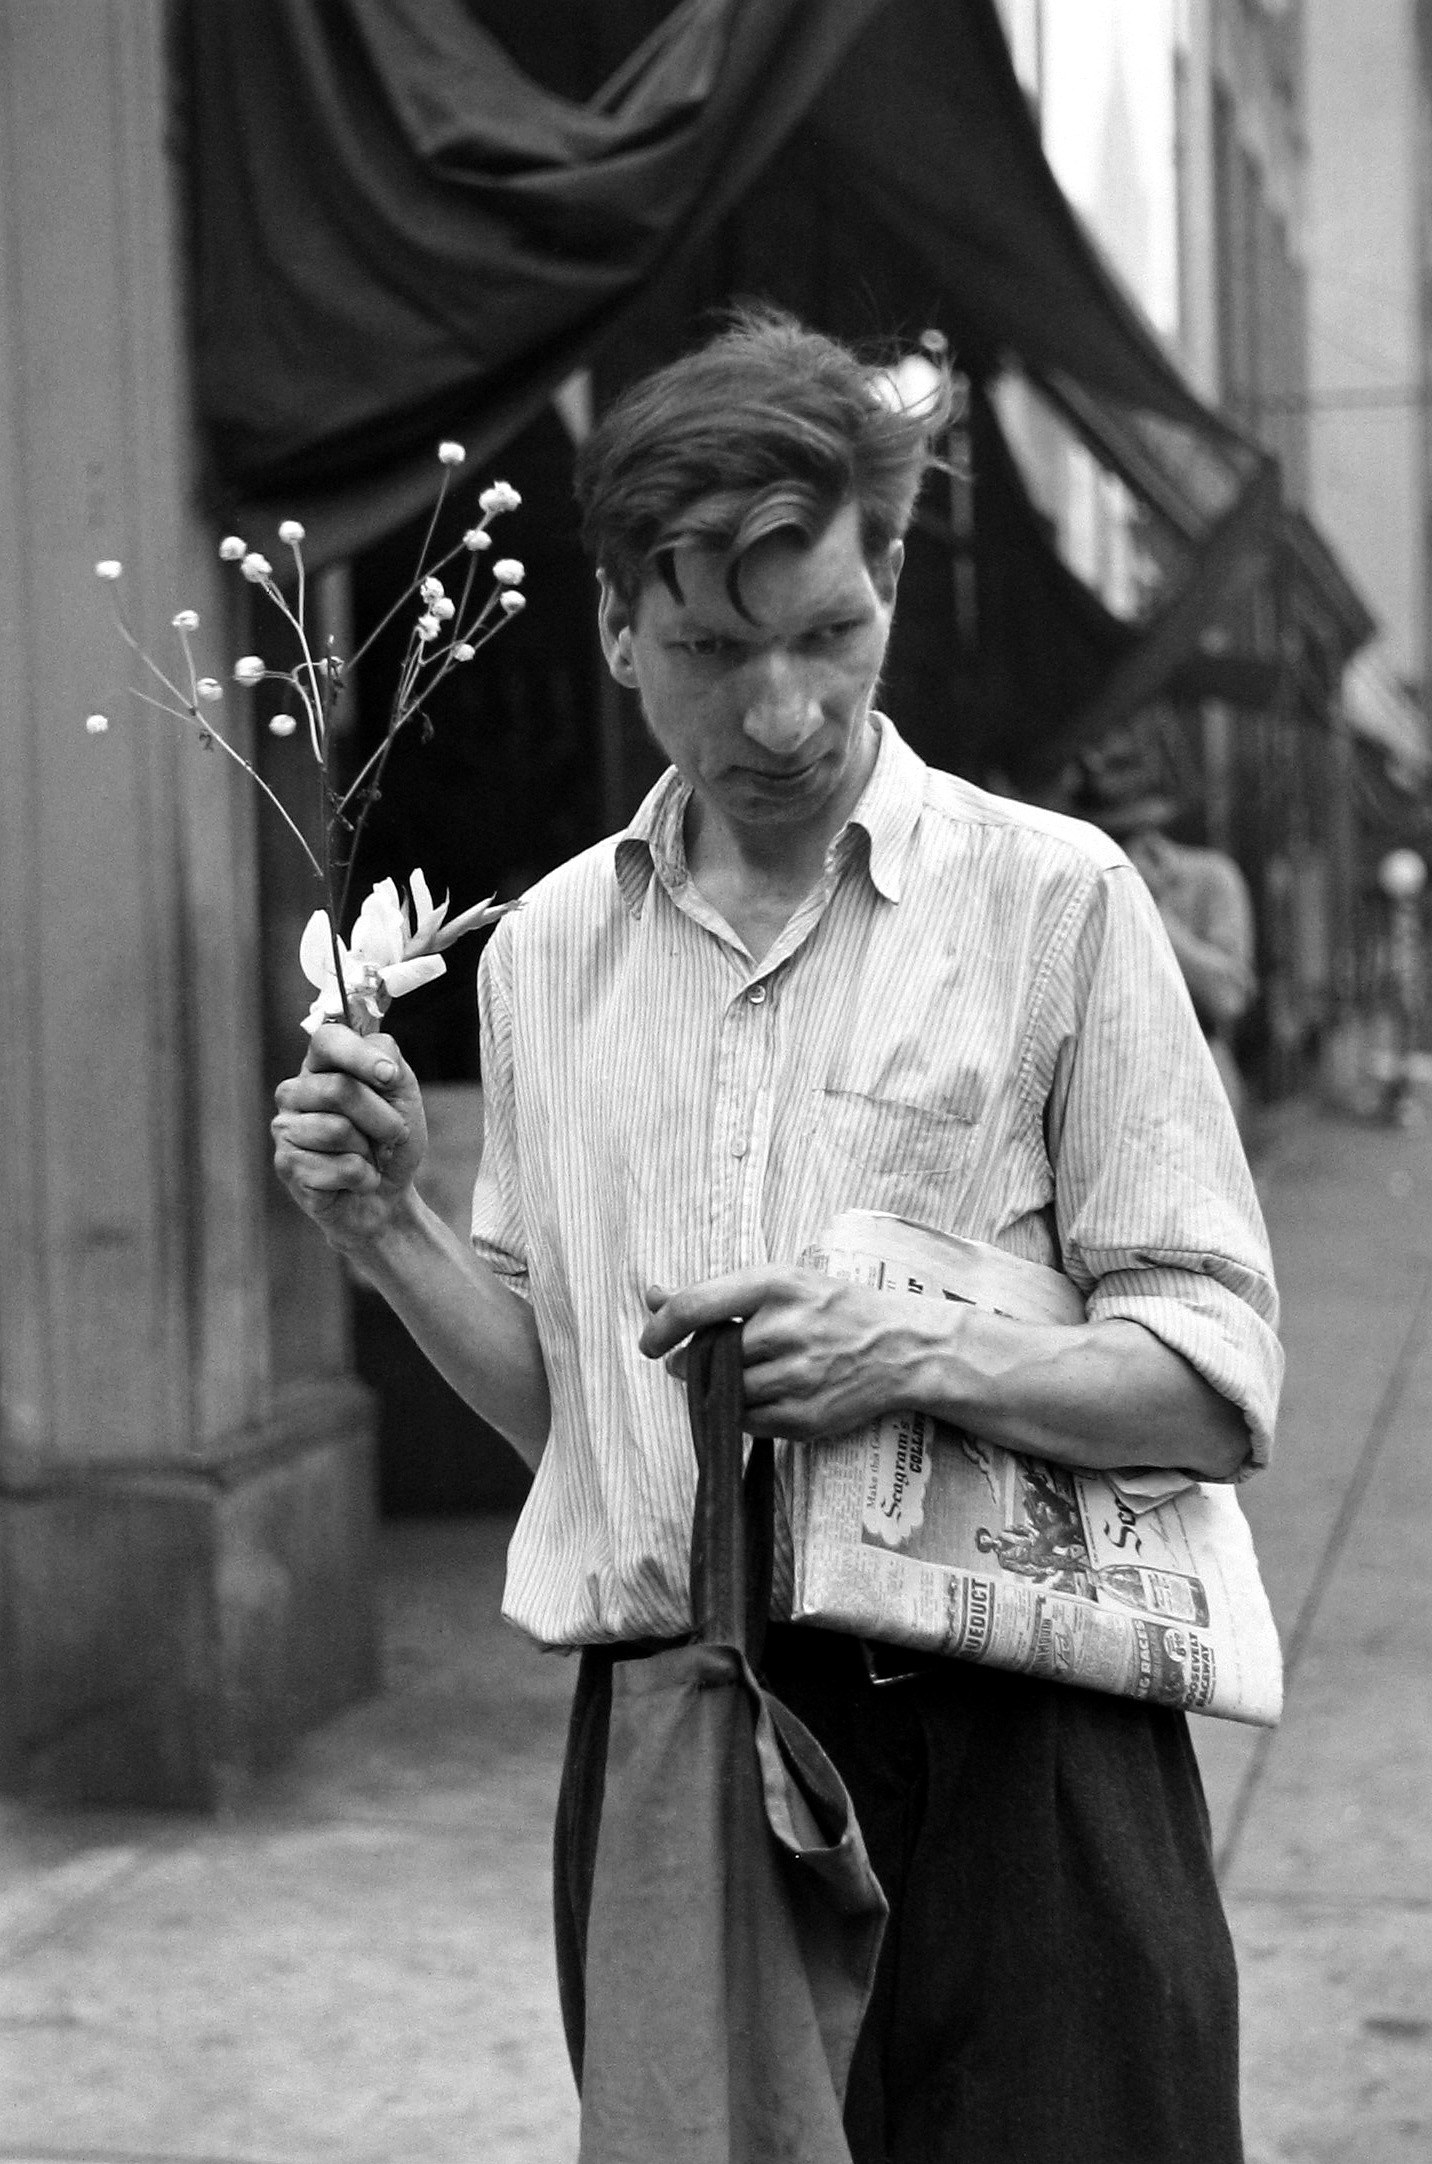 a man holds flowers, a newspaper and a tote bag and looks away from the camera